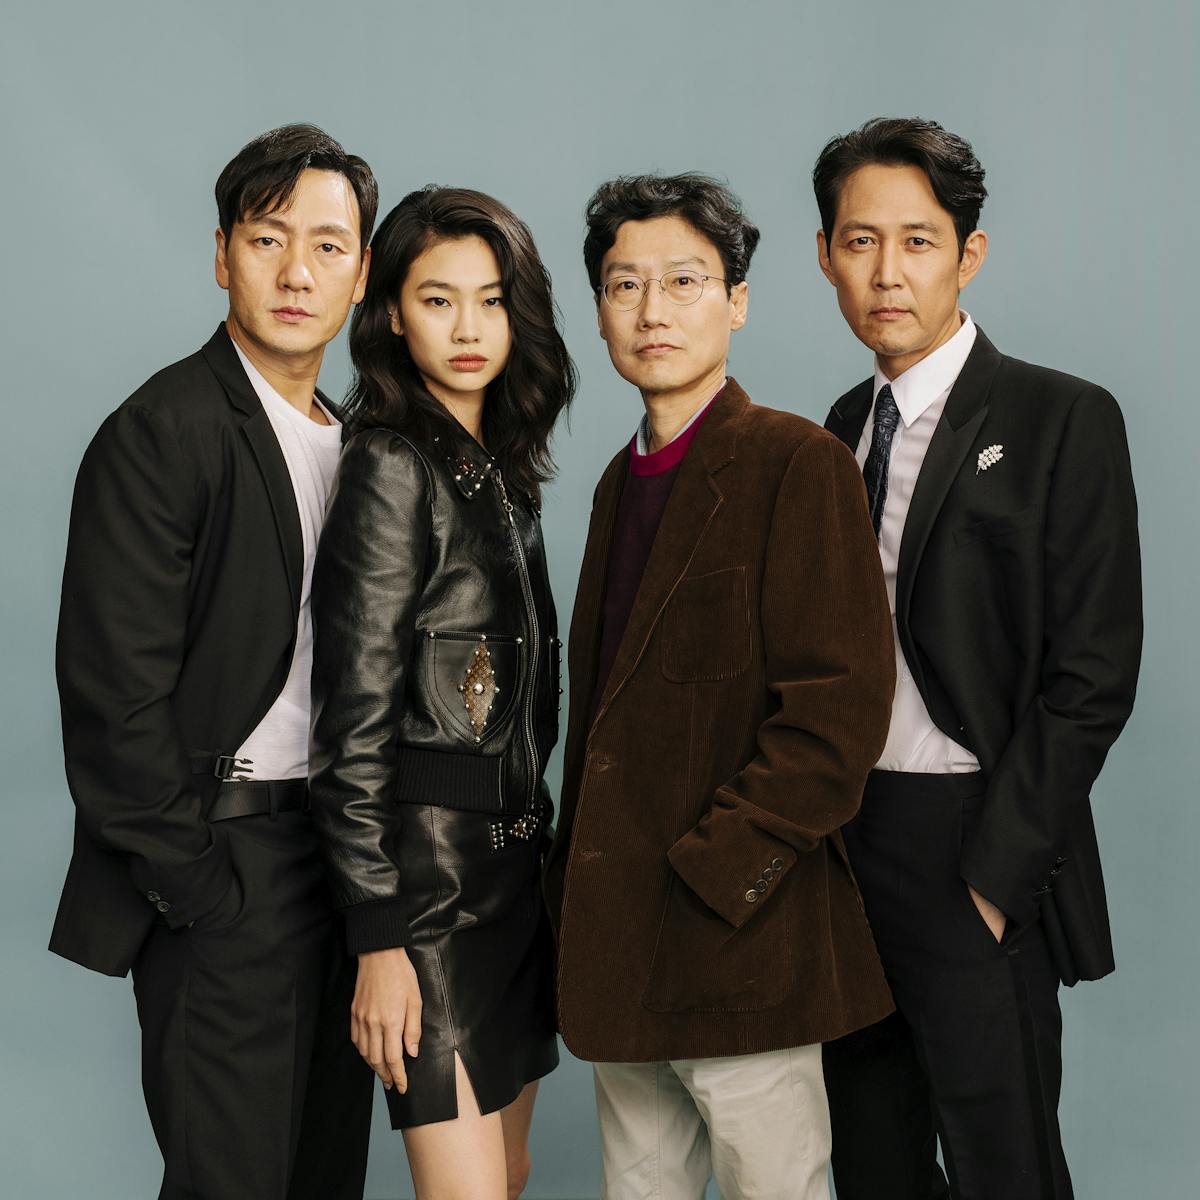 Park Hae-soo, Jung Ho-yeon, Hwang Dong-hyuk, and Lee Jung-jae stand in front of a gray-blue backdrop.